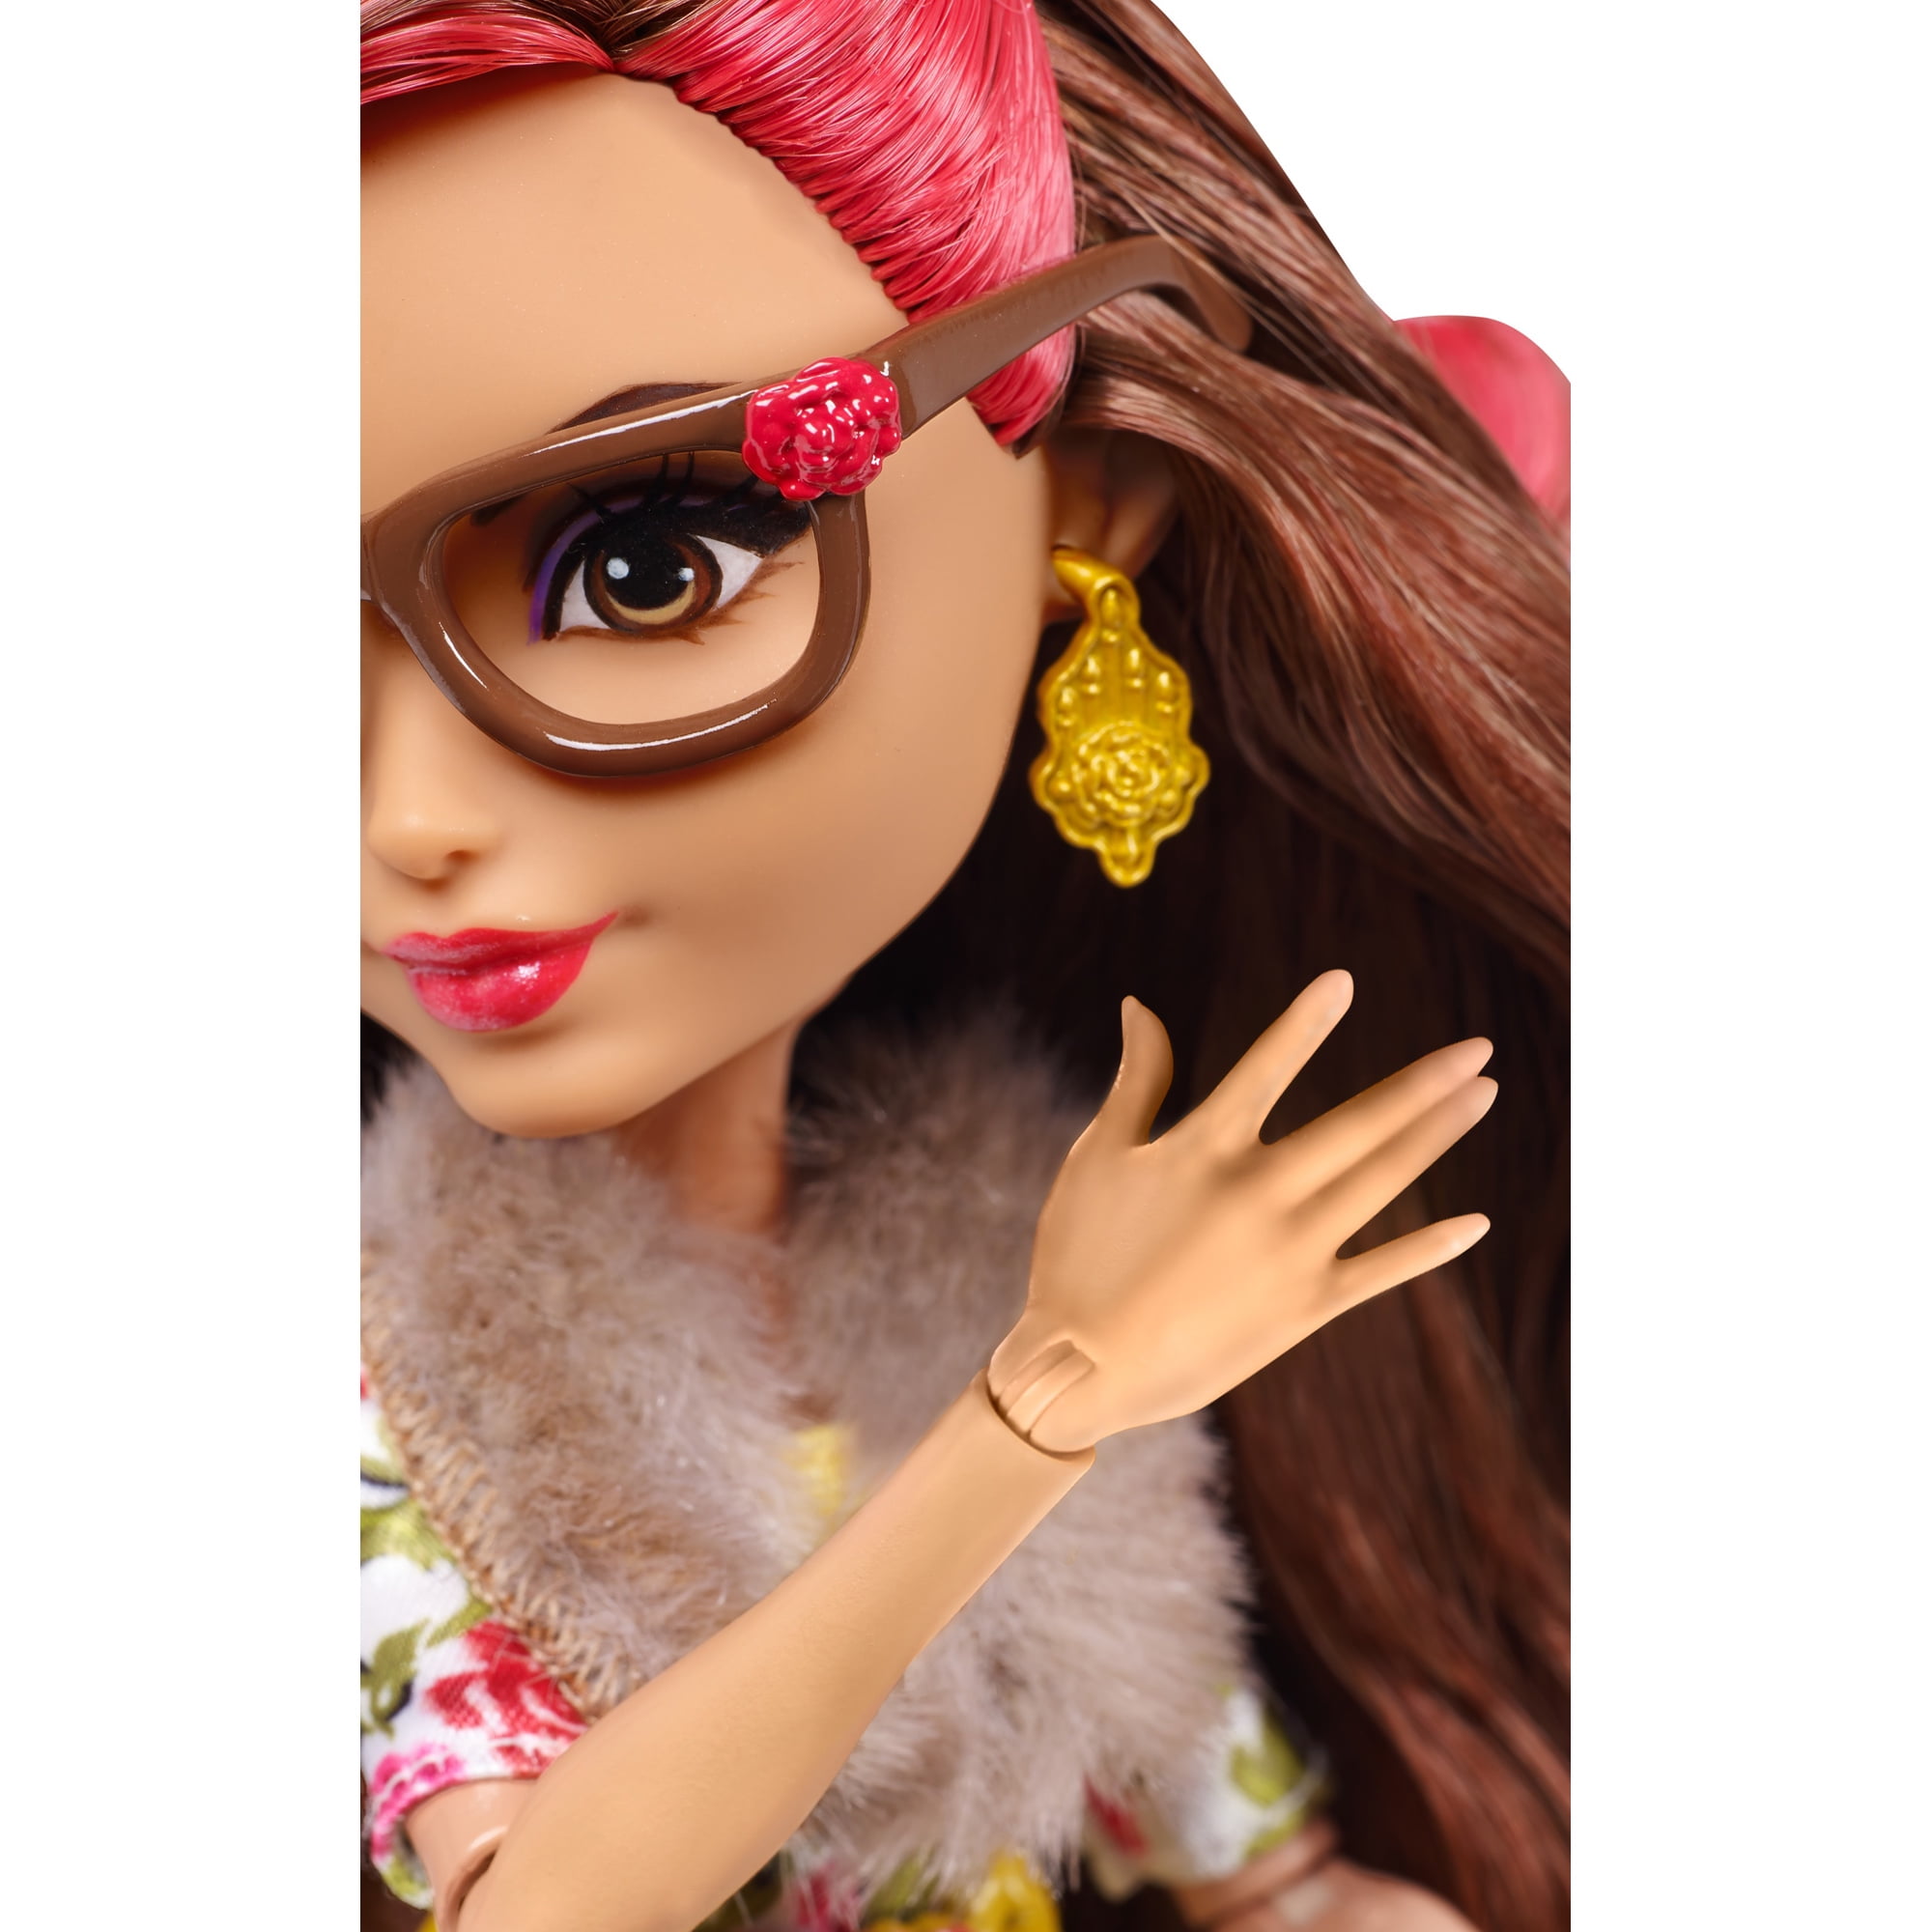 10.5” Mattel Ever After High Rosabella Beauty” Daughter Beauty Beast Doll  NRFB O